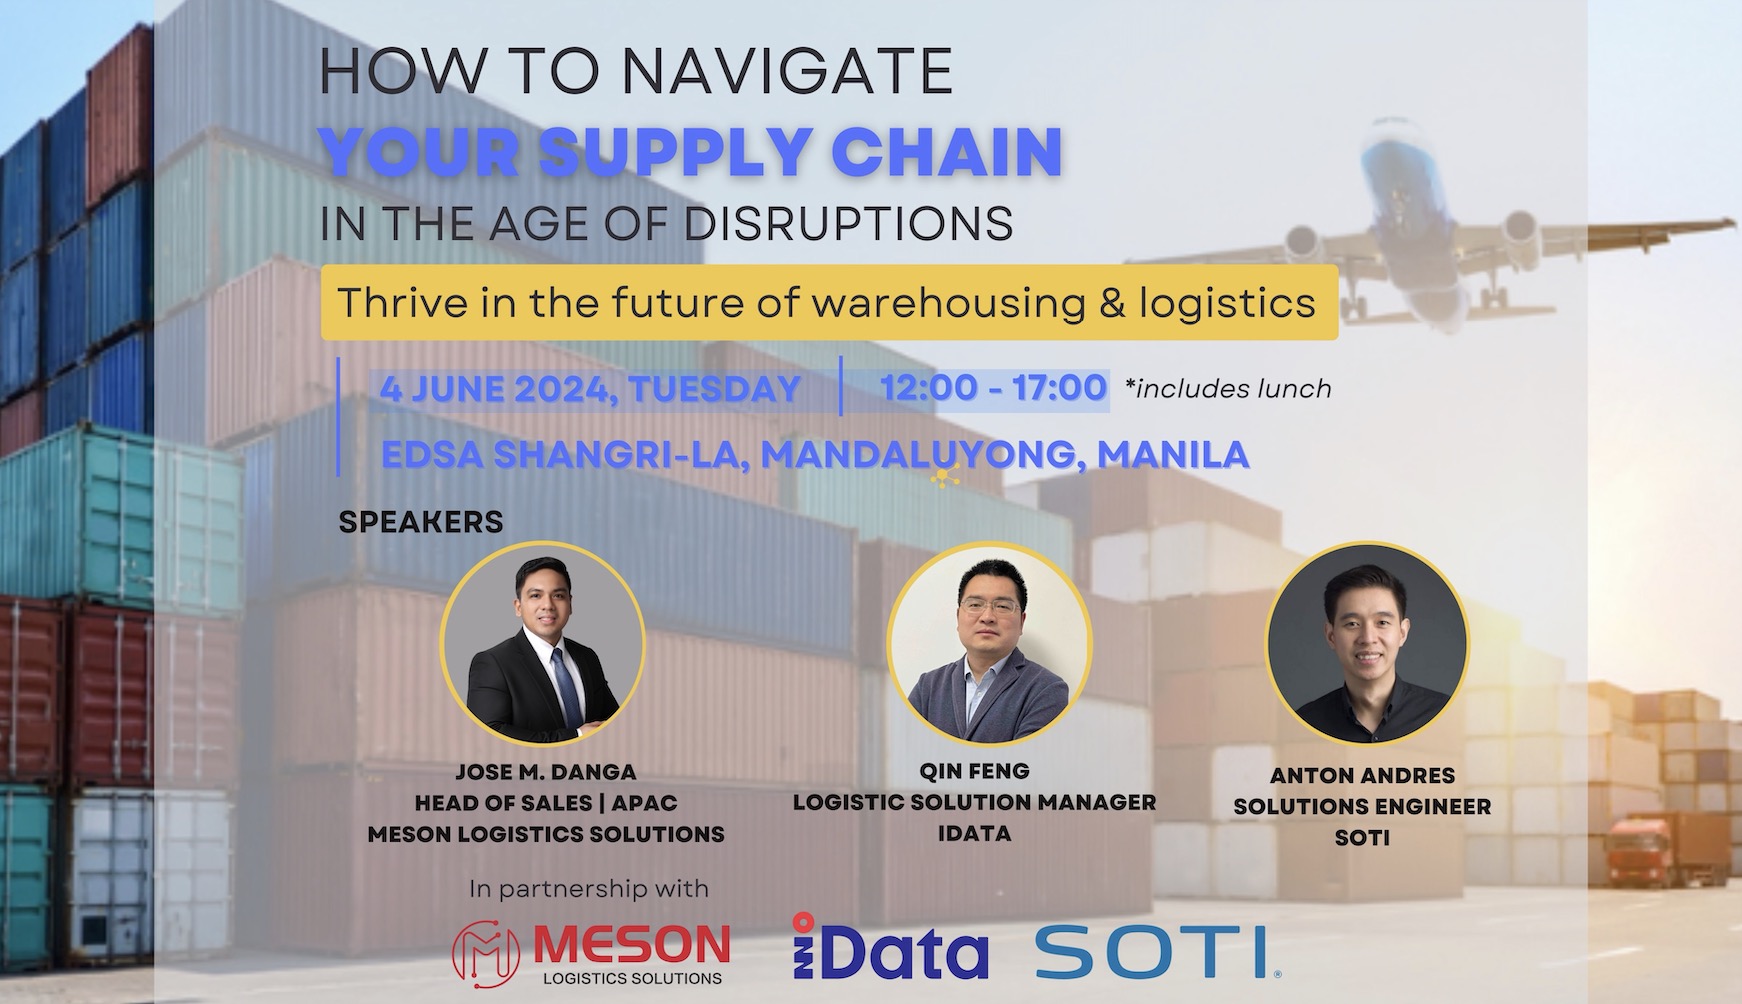 Philippines Logistics Seminar: How to Navigate Your Supply Chain in the Age of Disruptions